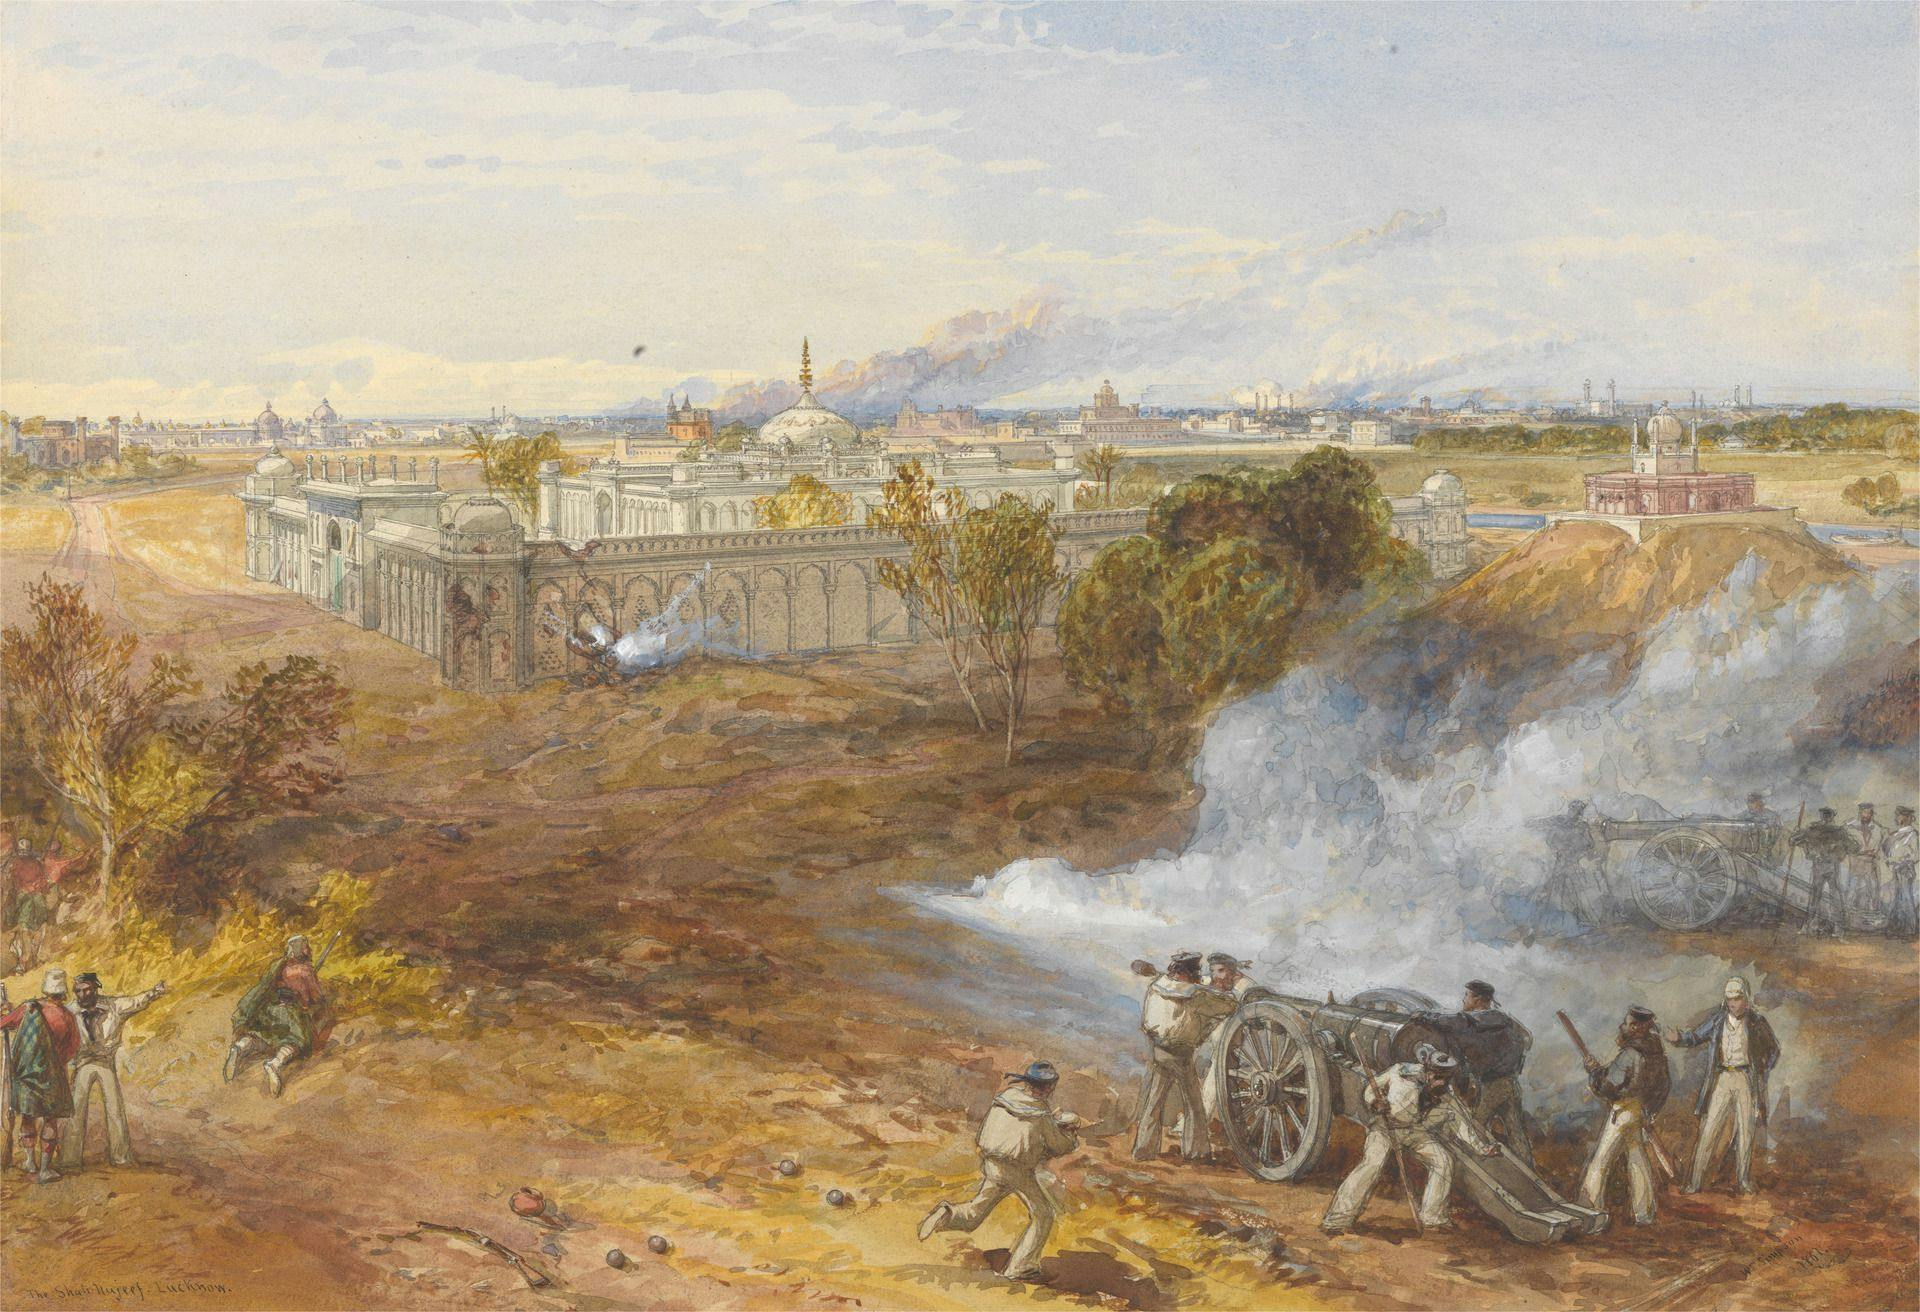 The 1857 battle at Shah Najaf, by William Sampson (1860)